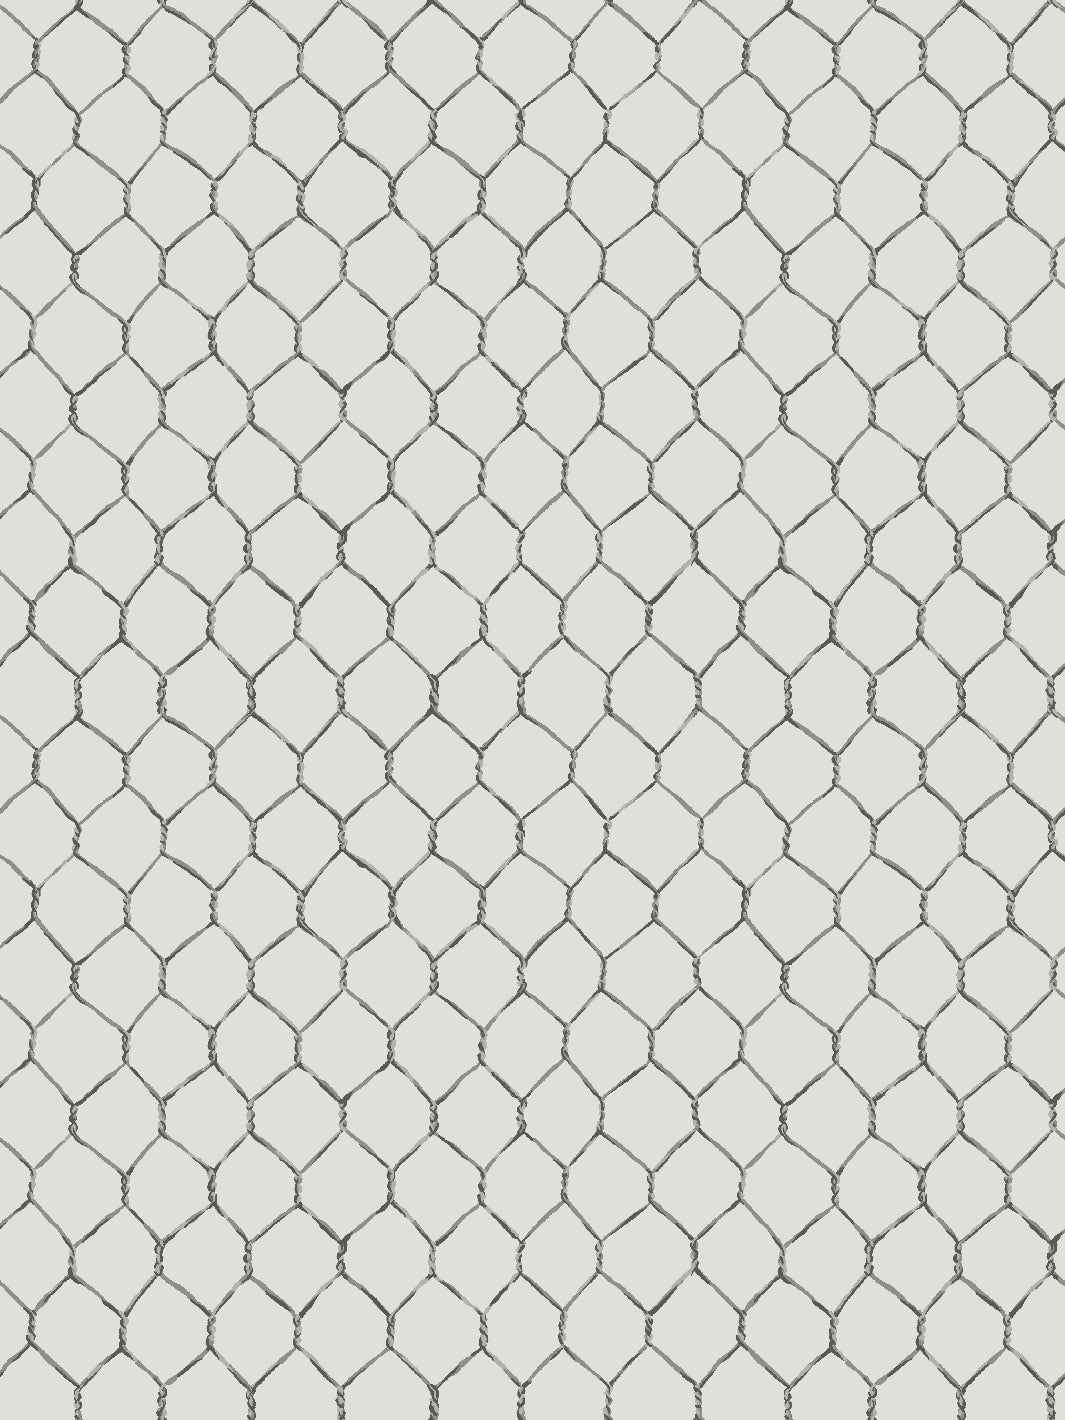 'Evelyn's Chicken Wire' Wallpaper by Sarah Jessica Parker - Metal on Silver